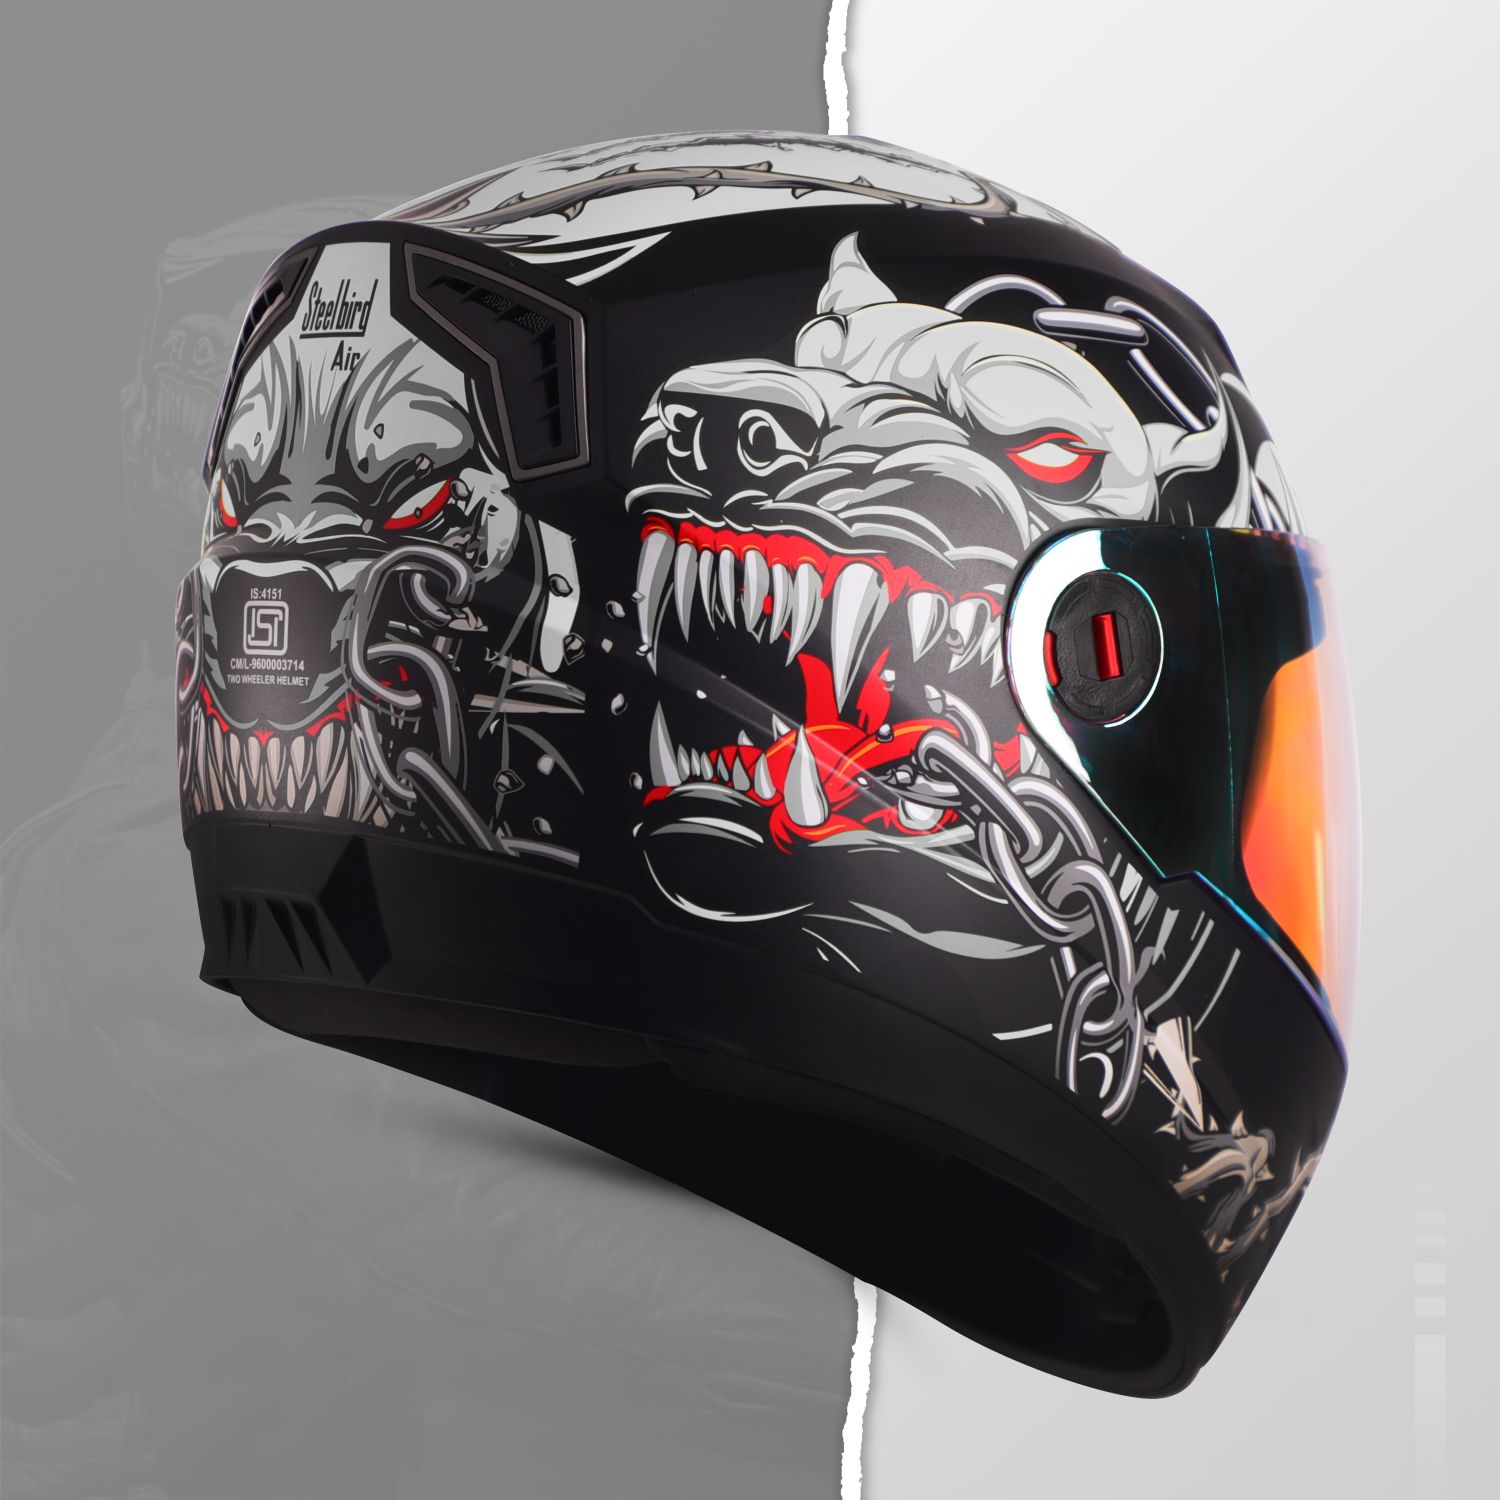 Steelbird SBA-1 Angry Dog ISI Certified Full Face Graphic Helmet For Men And Women (Glossy Black Grey With Night Vision Gold Visor)